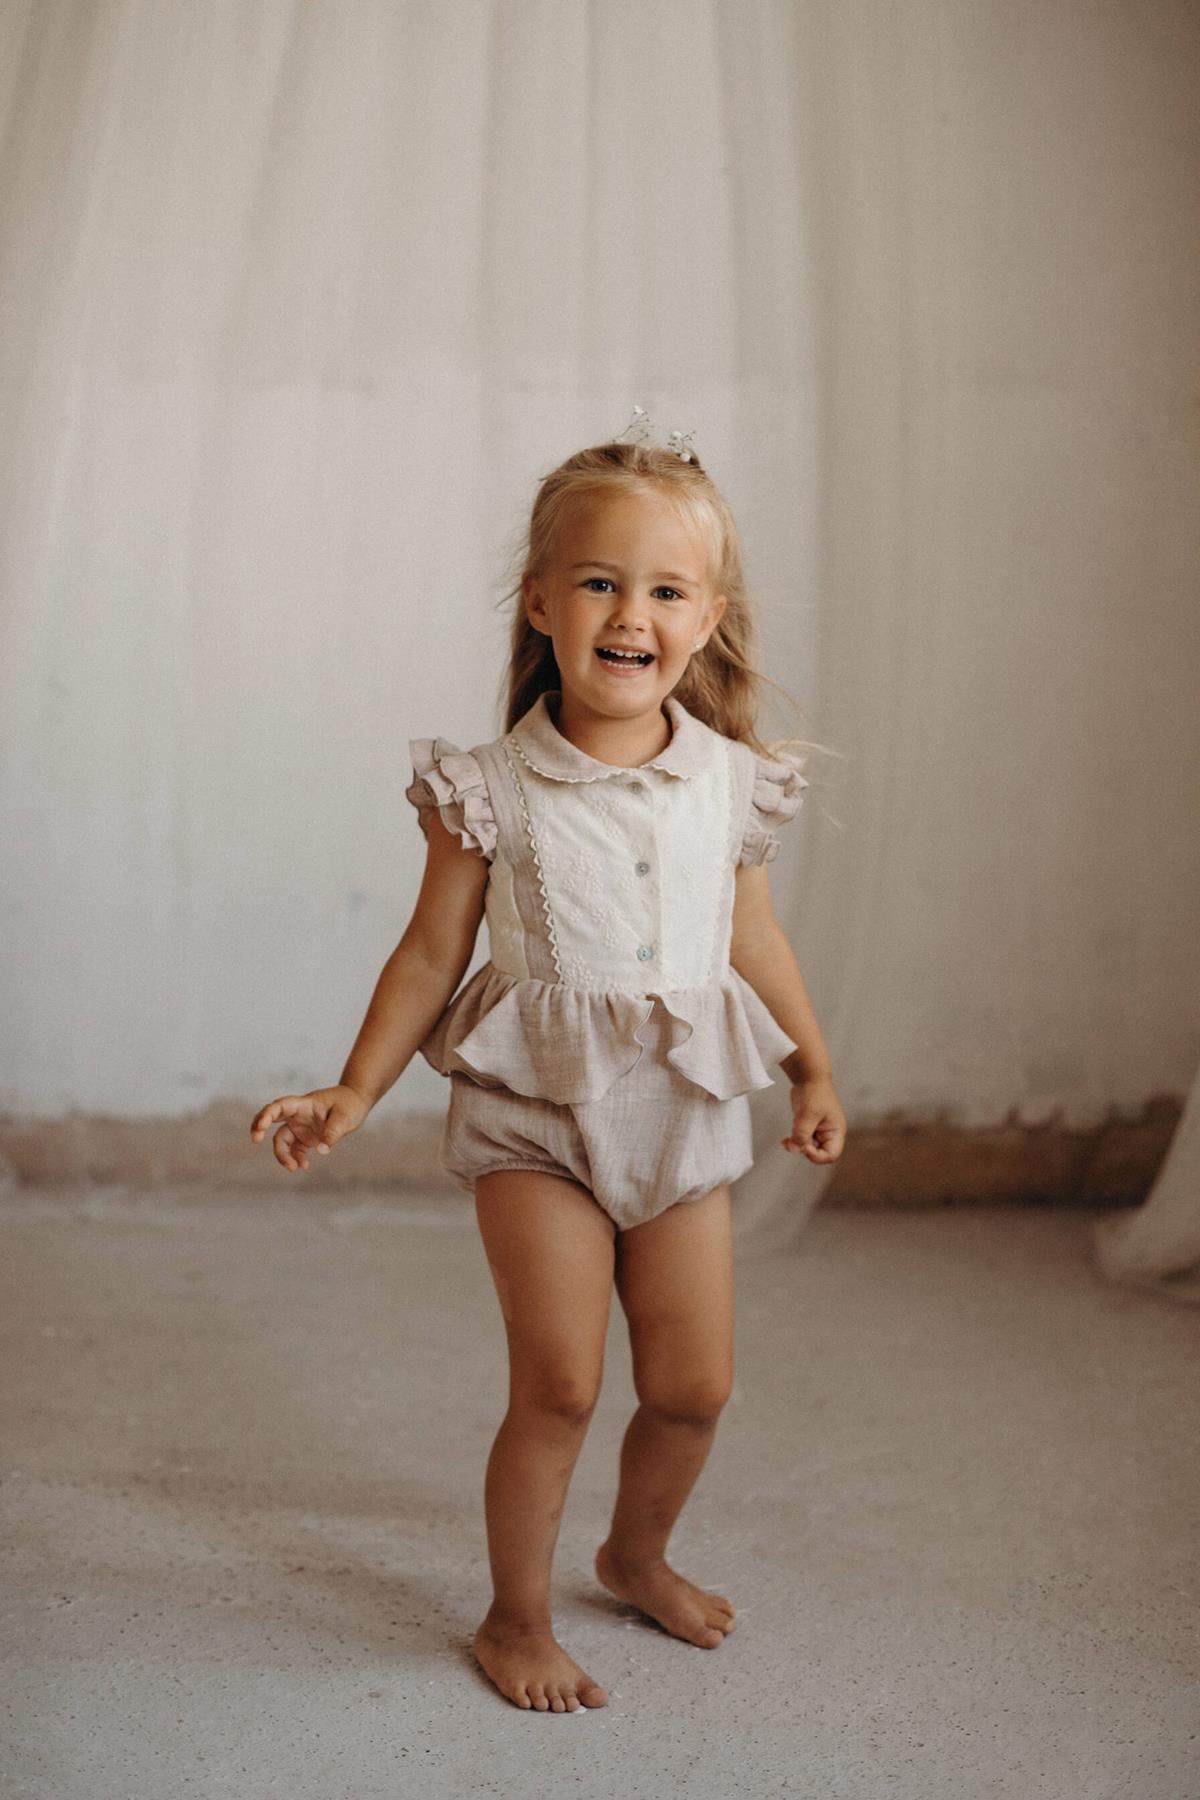 Mod.8.4 Organic sand romper suit with collar | SS23 Mod.8.4 Organic sand romper suit with collar